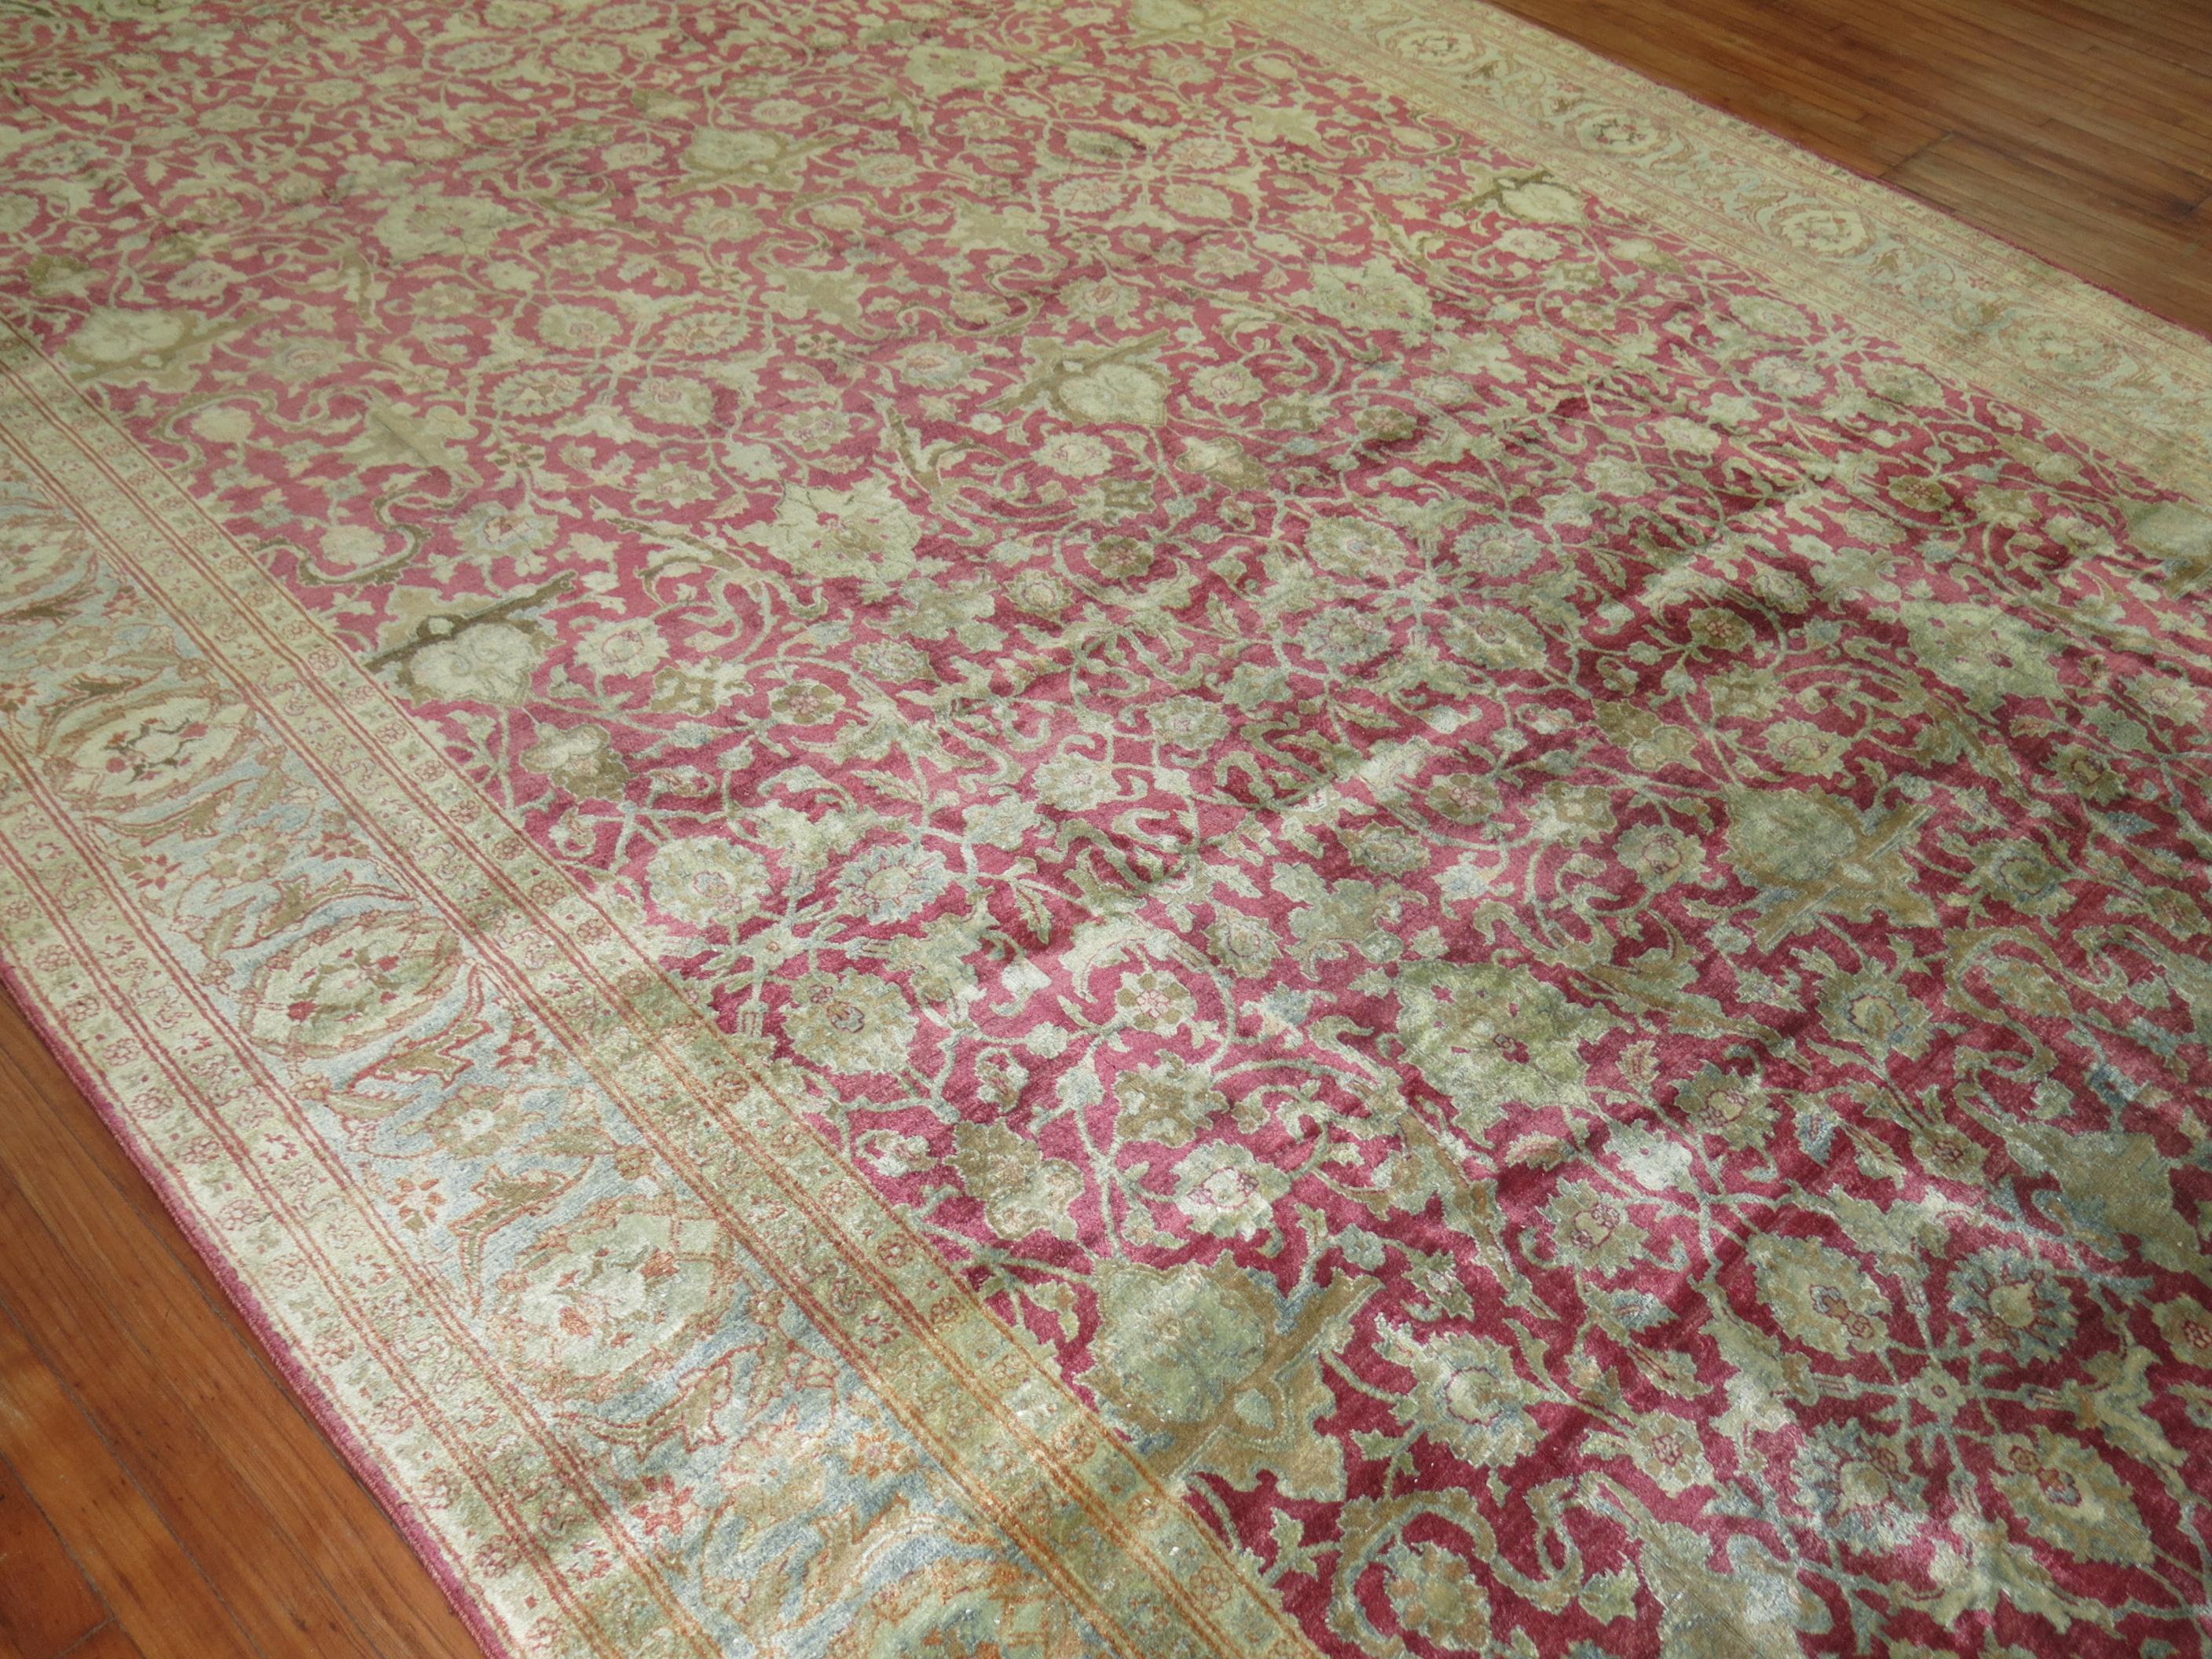 Raspberry Icy Blue Oversize Persian Tabriz Rug, Early 20th Century For Sale 1